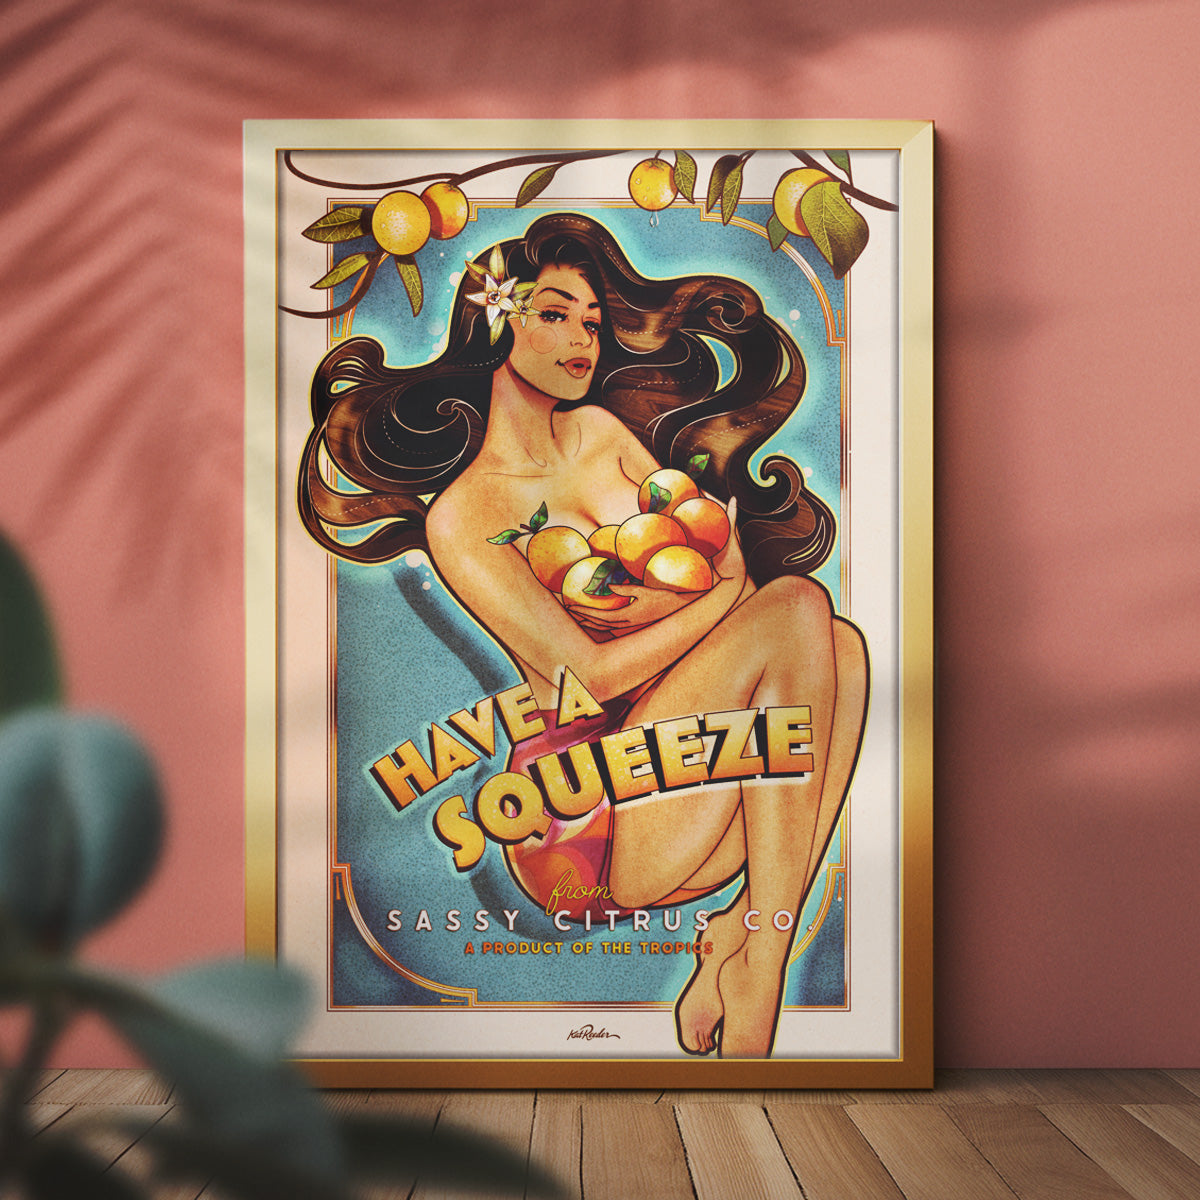 vintage style poster featuring a pinup girl sitting cradling oranges in a blue background, in the style of art nouveau and vintage pinup art. The text reads "Have a Squeeze with sassy Citrus Co"